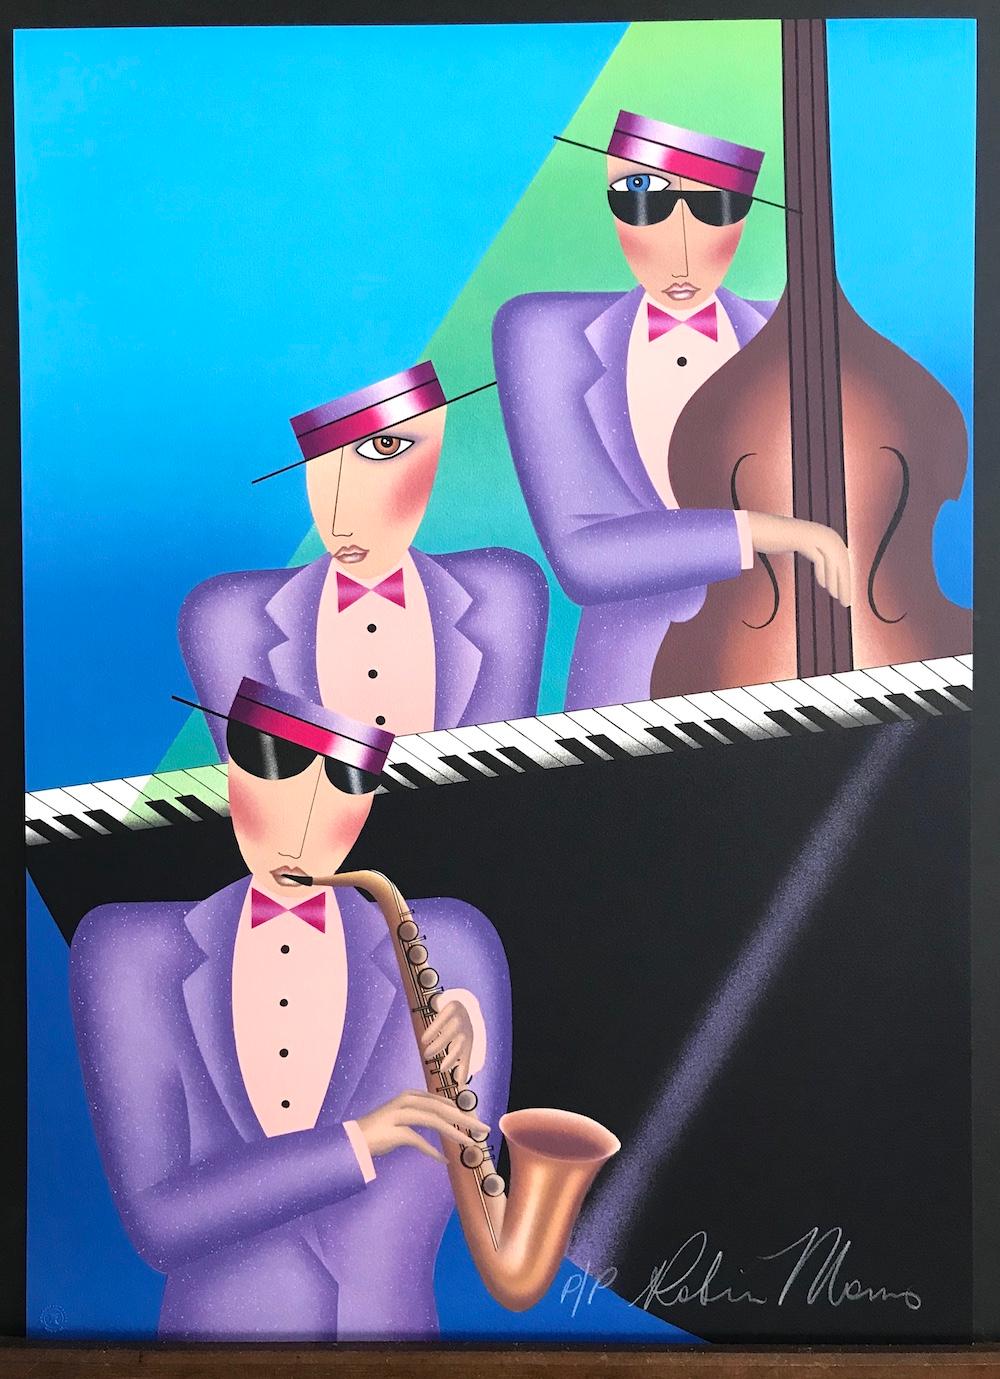 JAZZ TRIO Signed Lithograph, Small Group Portrait, Hot Club Swing Music, Piano - Art Deco Print by Robin Morris